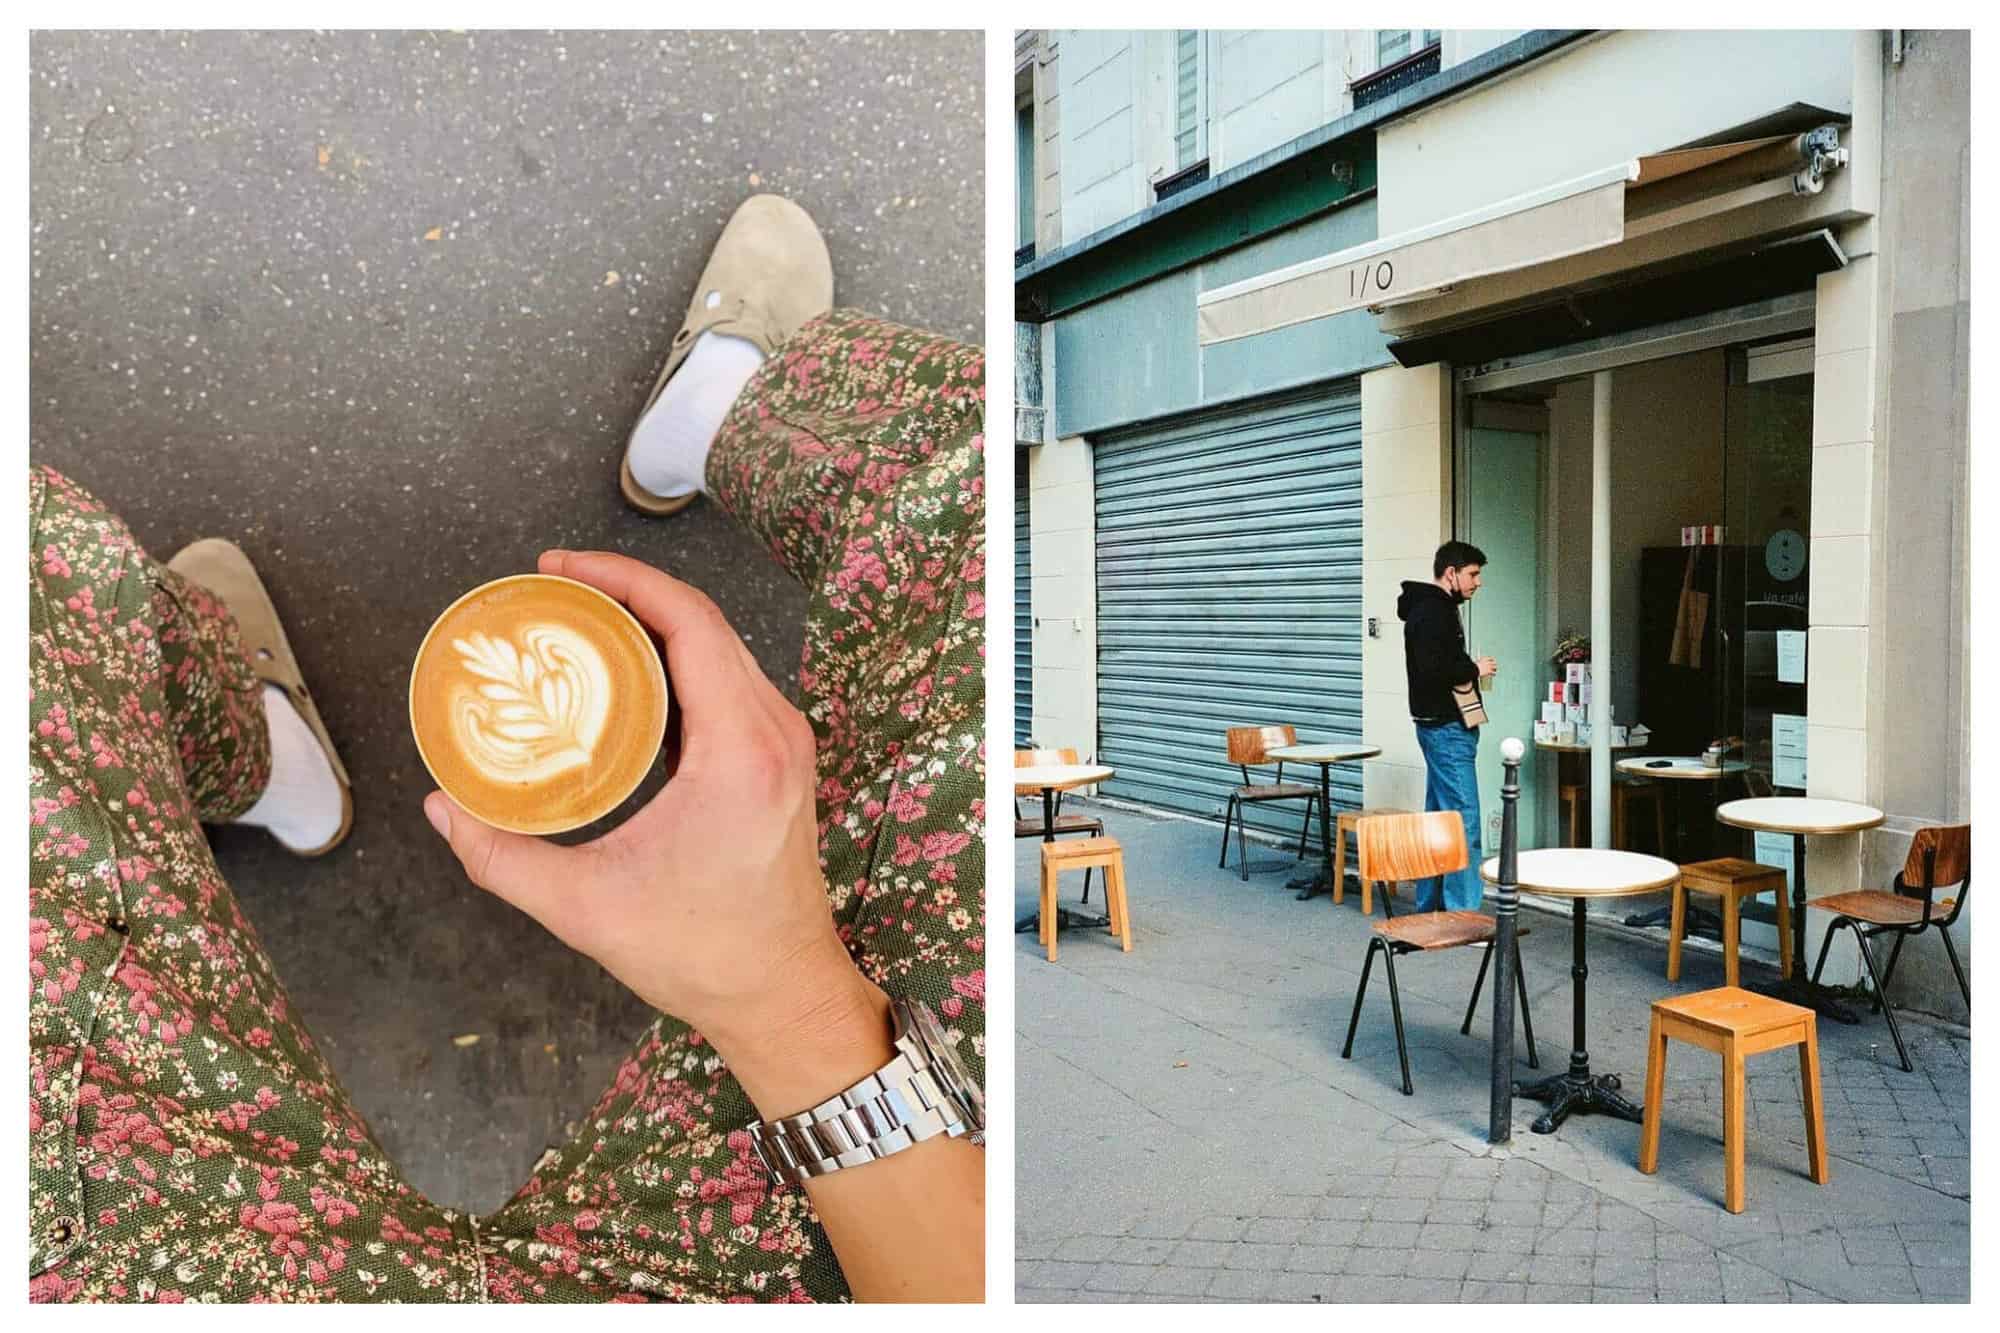 Left: a photo of someone holding a fresh coffee, taken from an above angle where you can see their green and pink floral pants and beige shoes.  Right: a photo of a worker standing outside the I / O coffee shop in Paris, with a terrace with no people. 